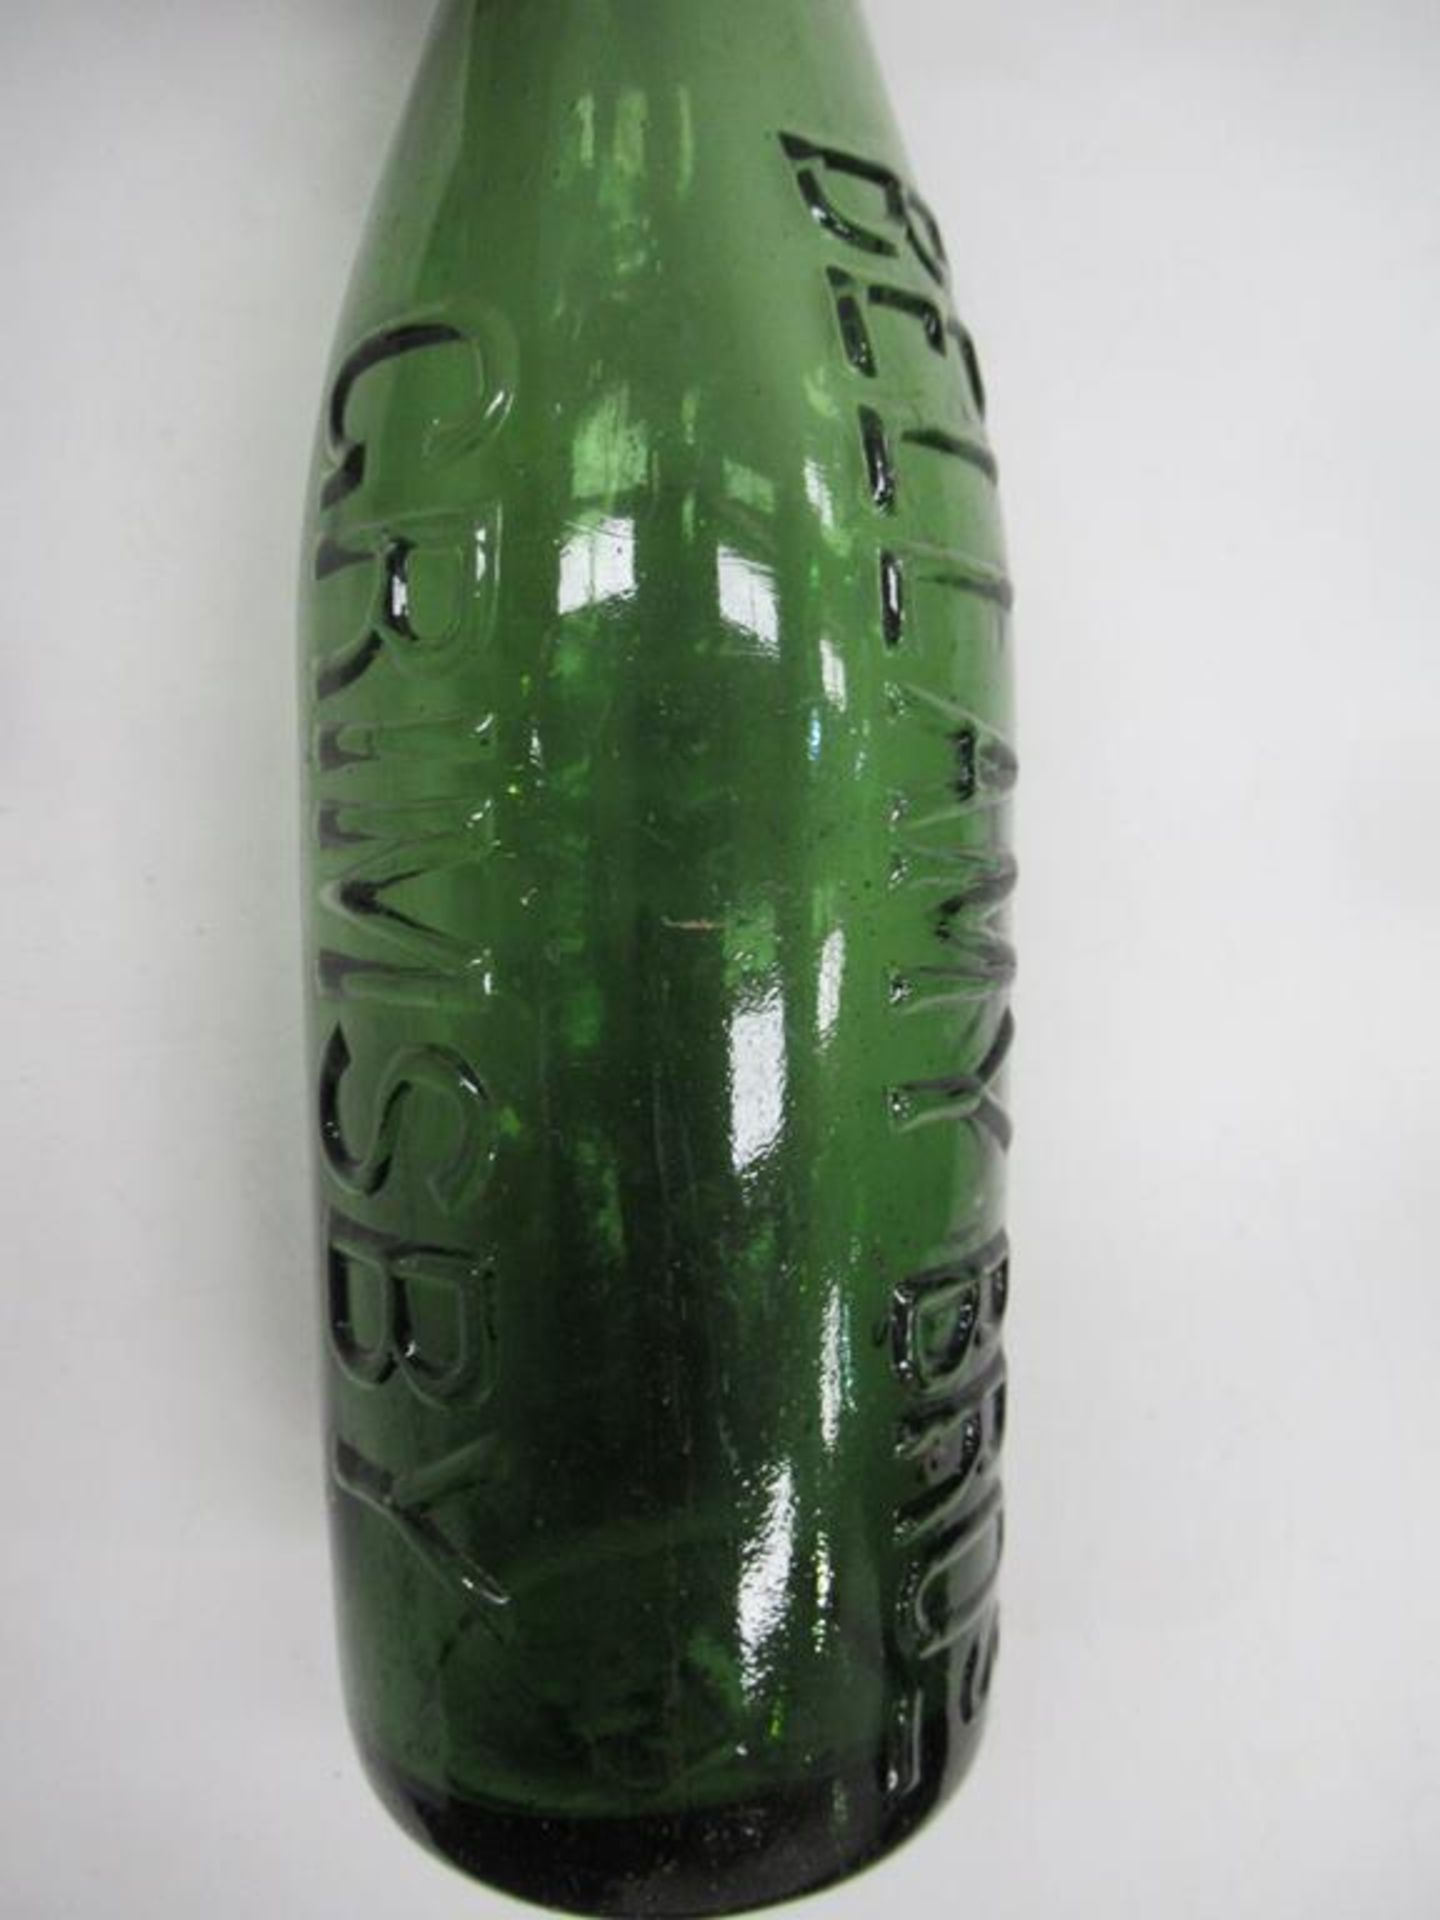 8x Bellamy Bro's (7) and Bellamy Bros Cuthbert coloured bottles (5x Grimsby, 3x Grimsby & Louth) - Image 13 of 28